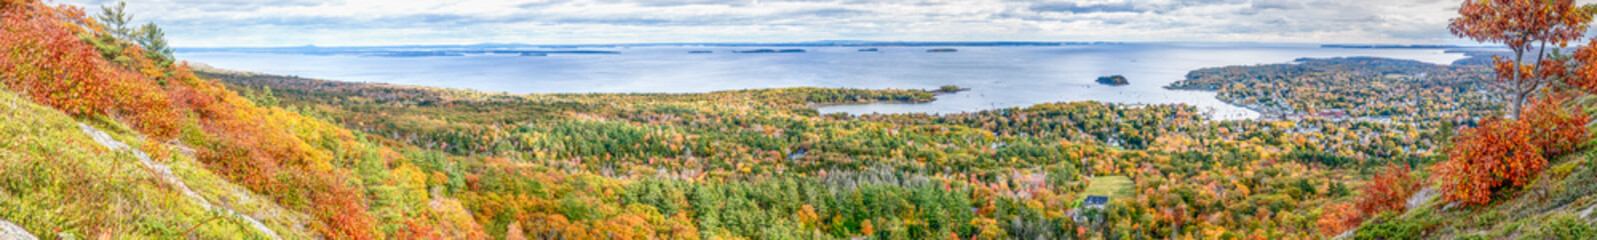 Autumn foliage covers the landscape around Penobscot Bay and the village of Camden, Maine as seen from atop Mount Battie in Camden Hills State Park in this wide photographic panorama.